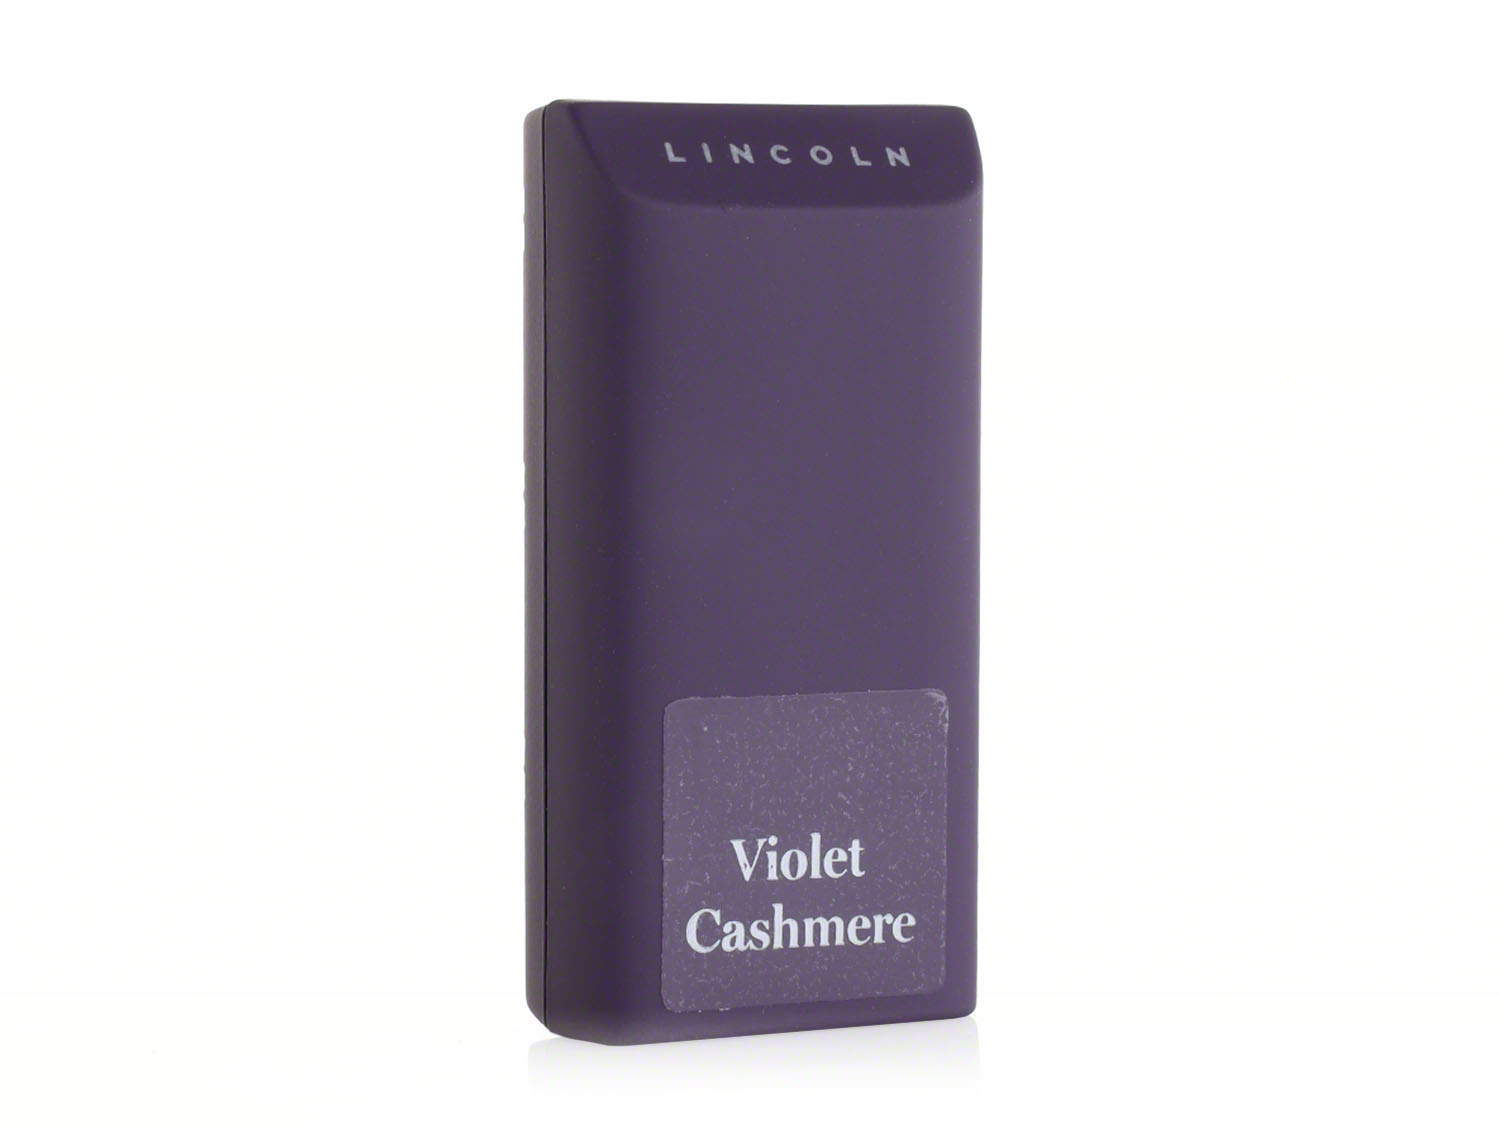 Image for Digital Scent Cartridge - Violet Cashmere from AccessoriesCanada